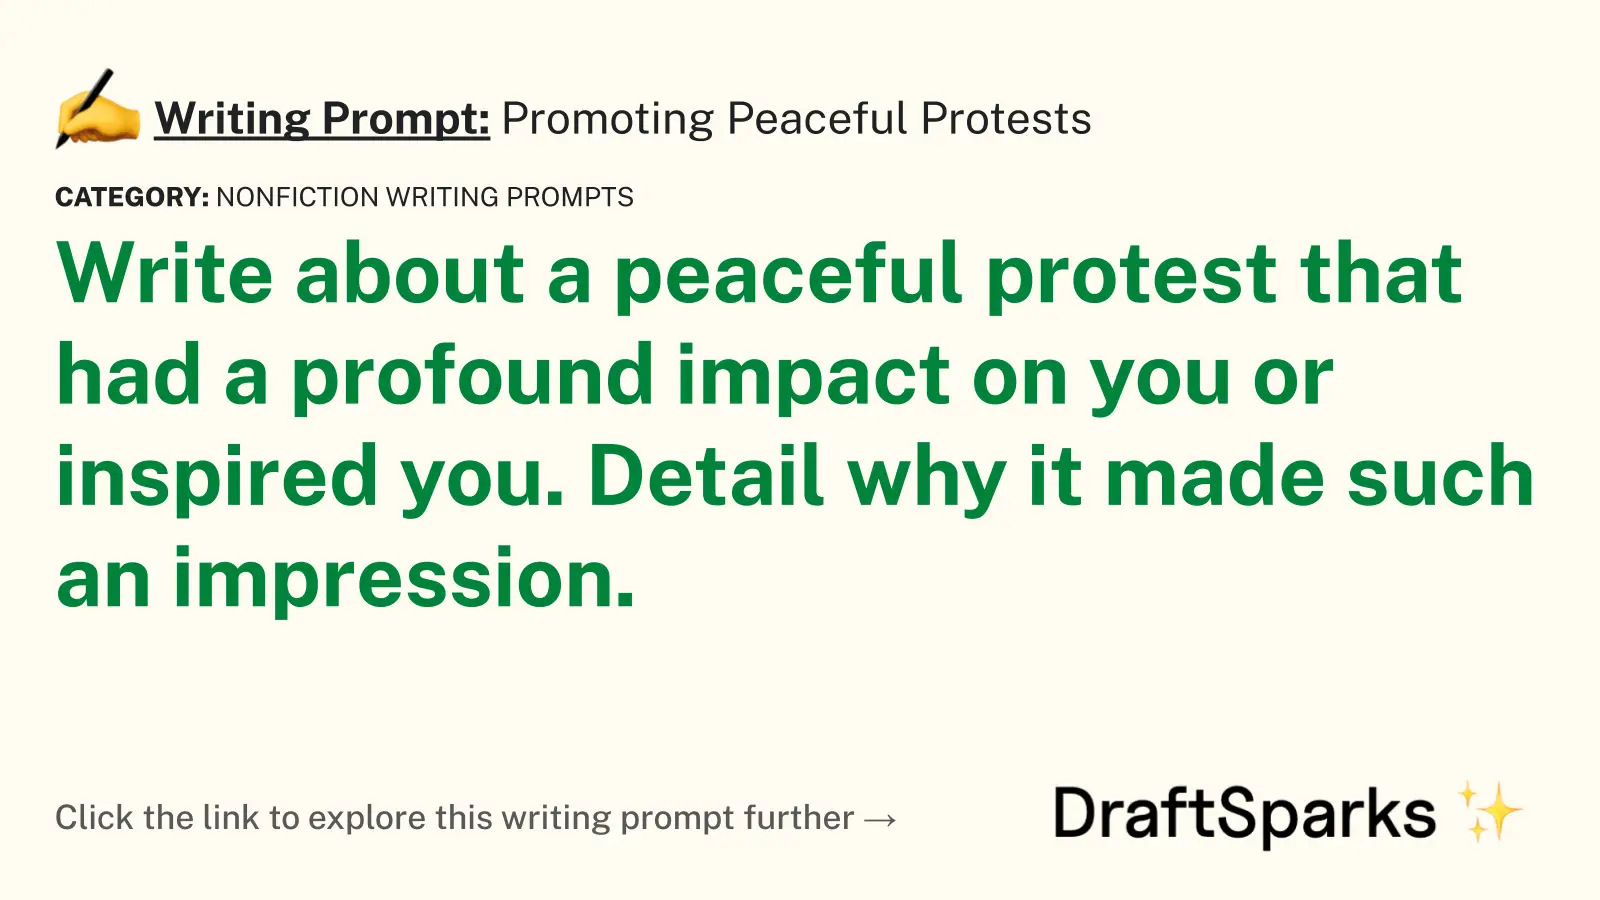 Promoting Peaceful Protests